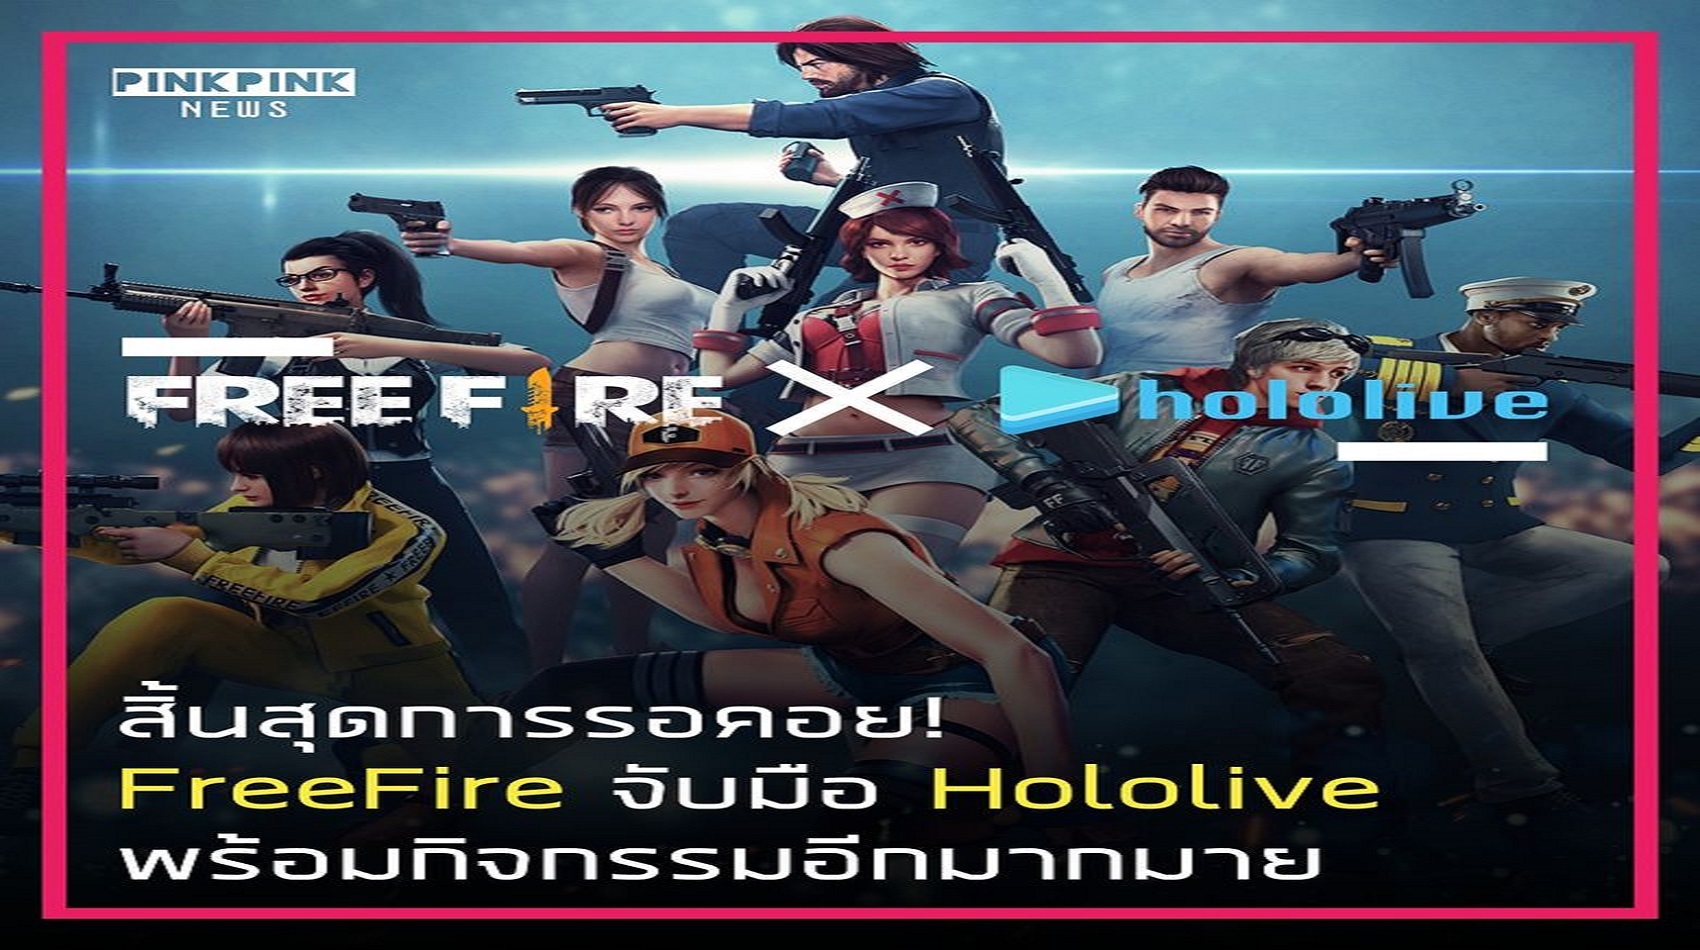 Collaboration Free Fire Ff X Hololive Right Everyday News